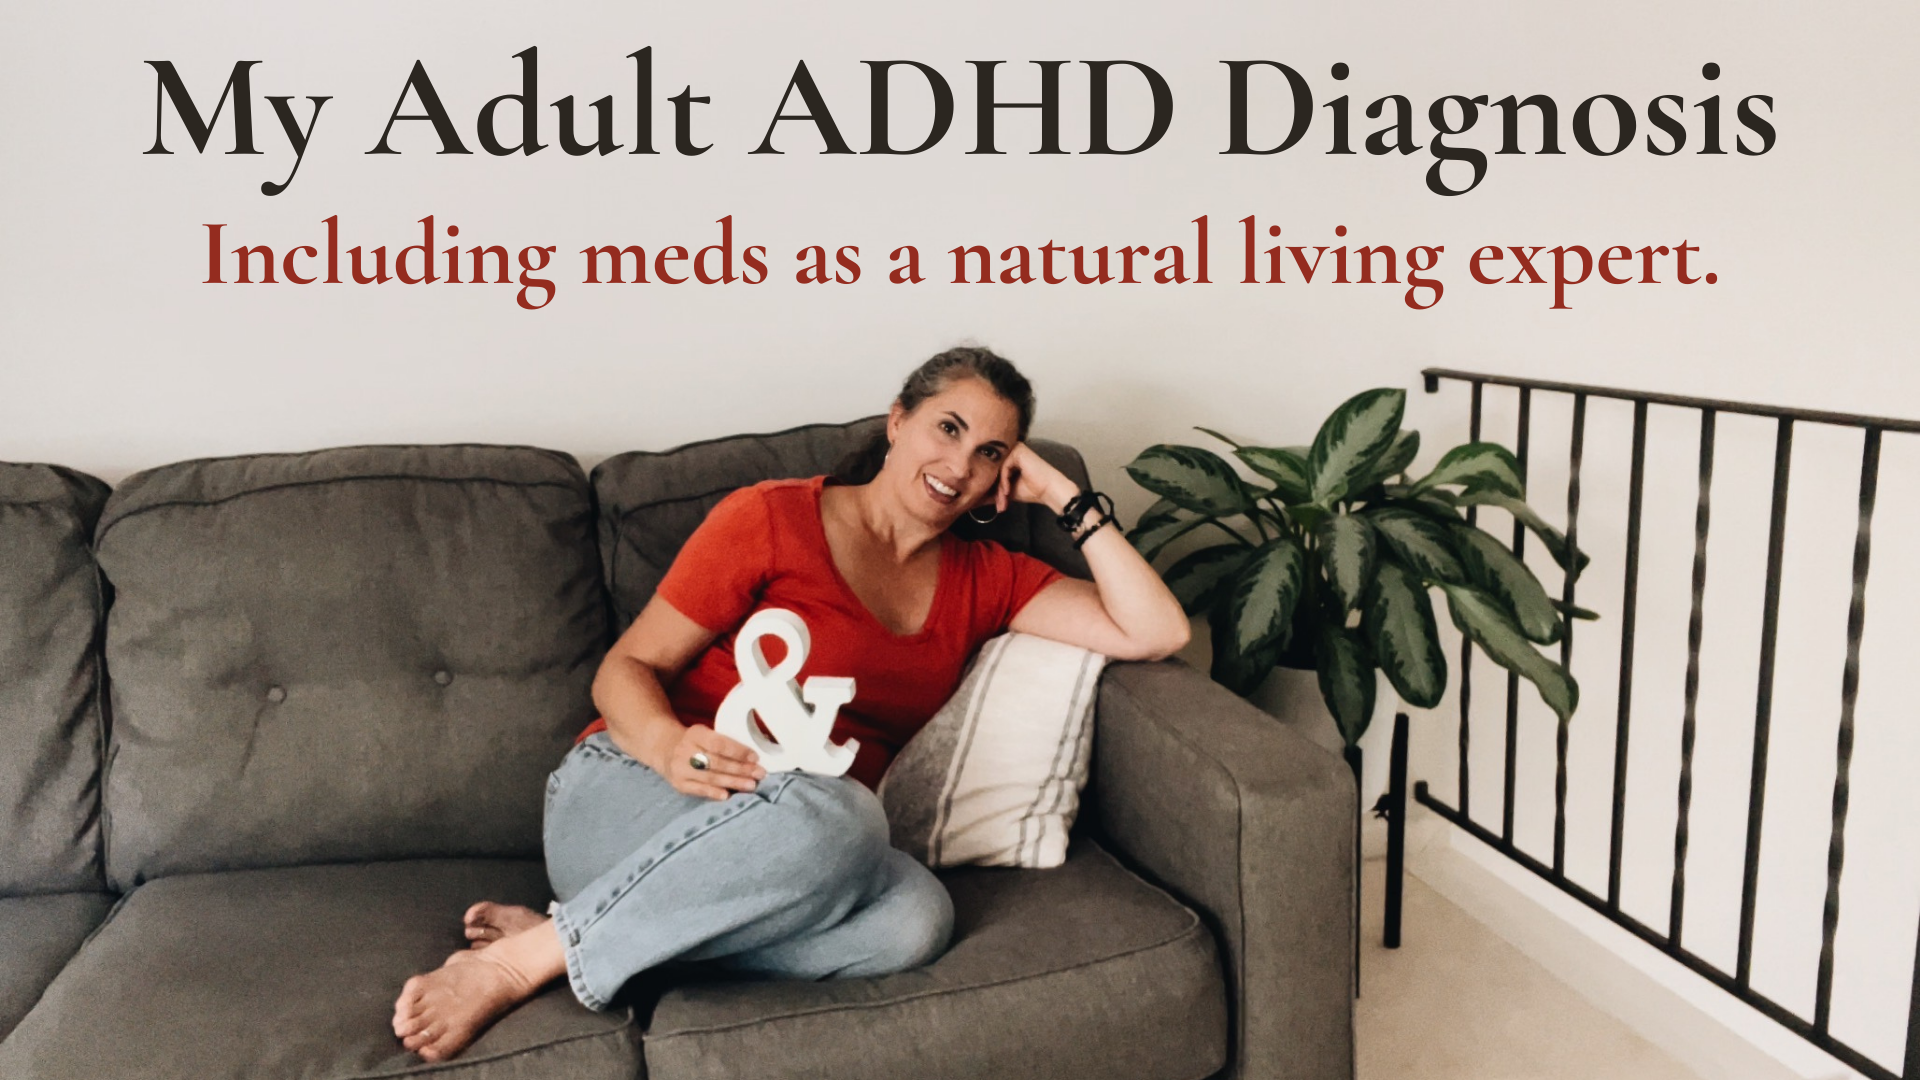 My Adult ADHD Diagnosis: Including meds as a natural living expert